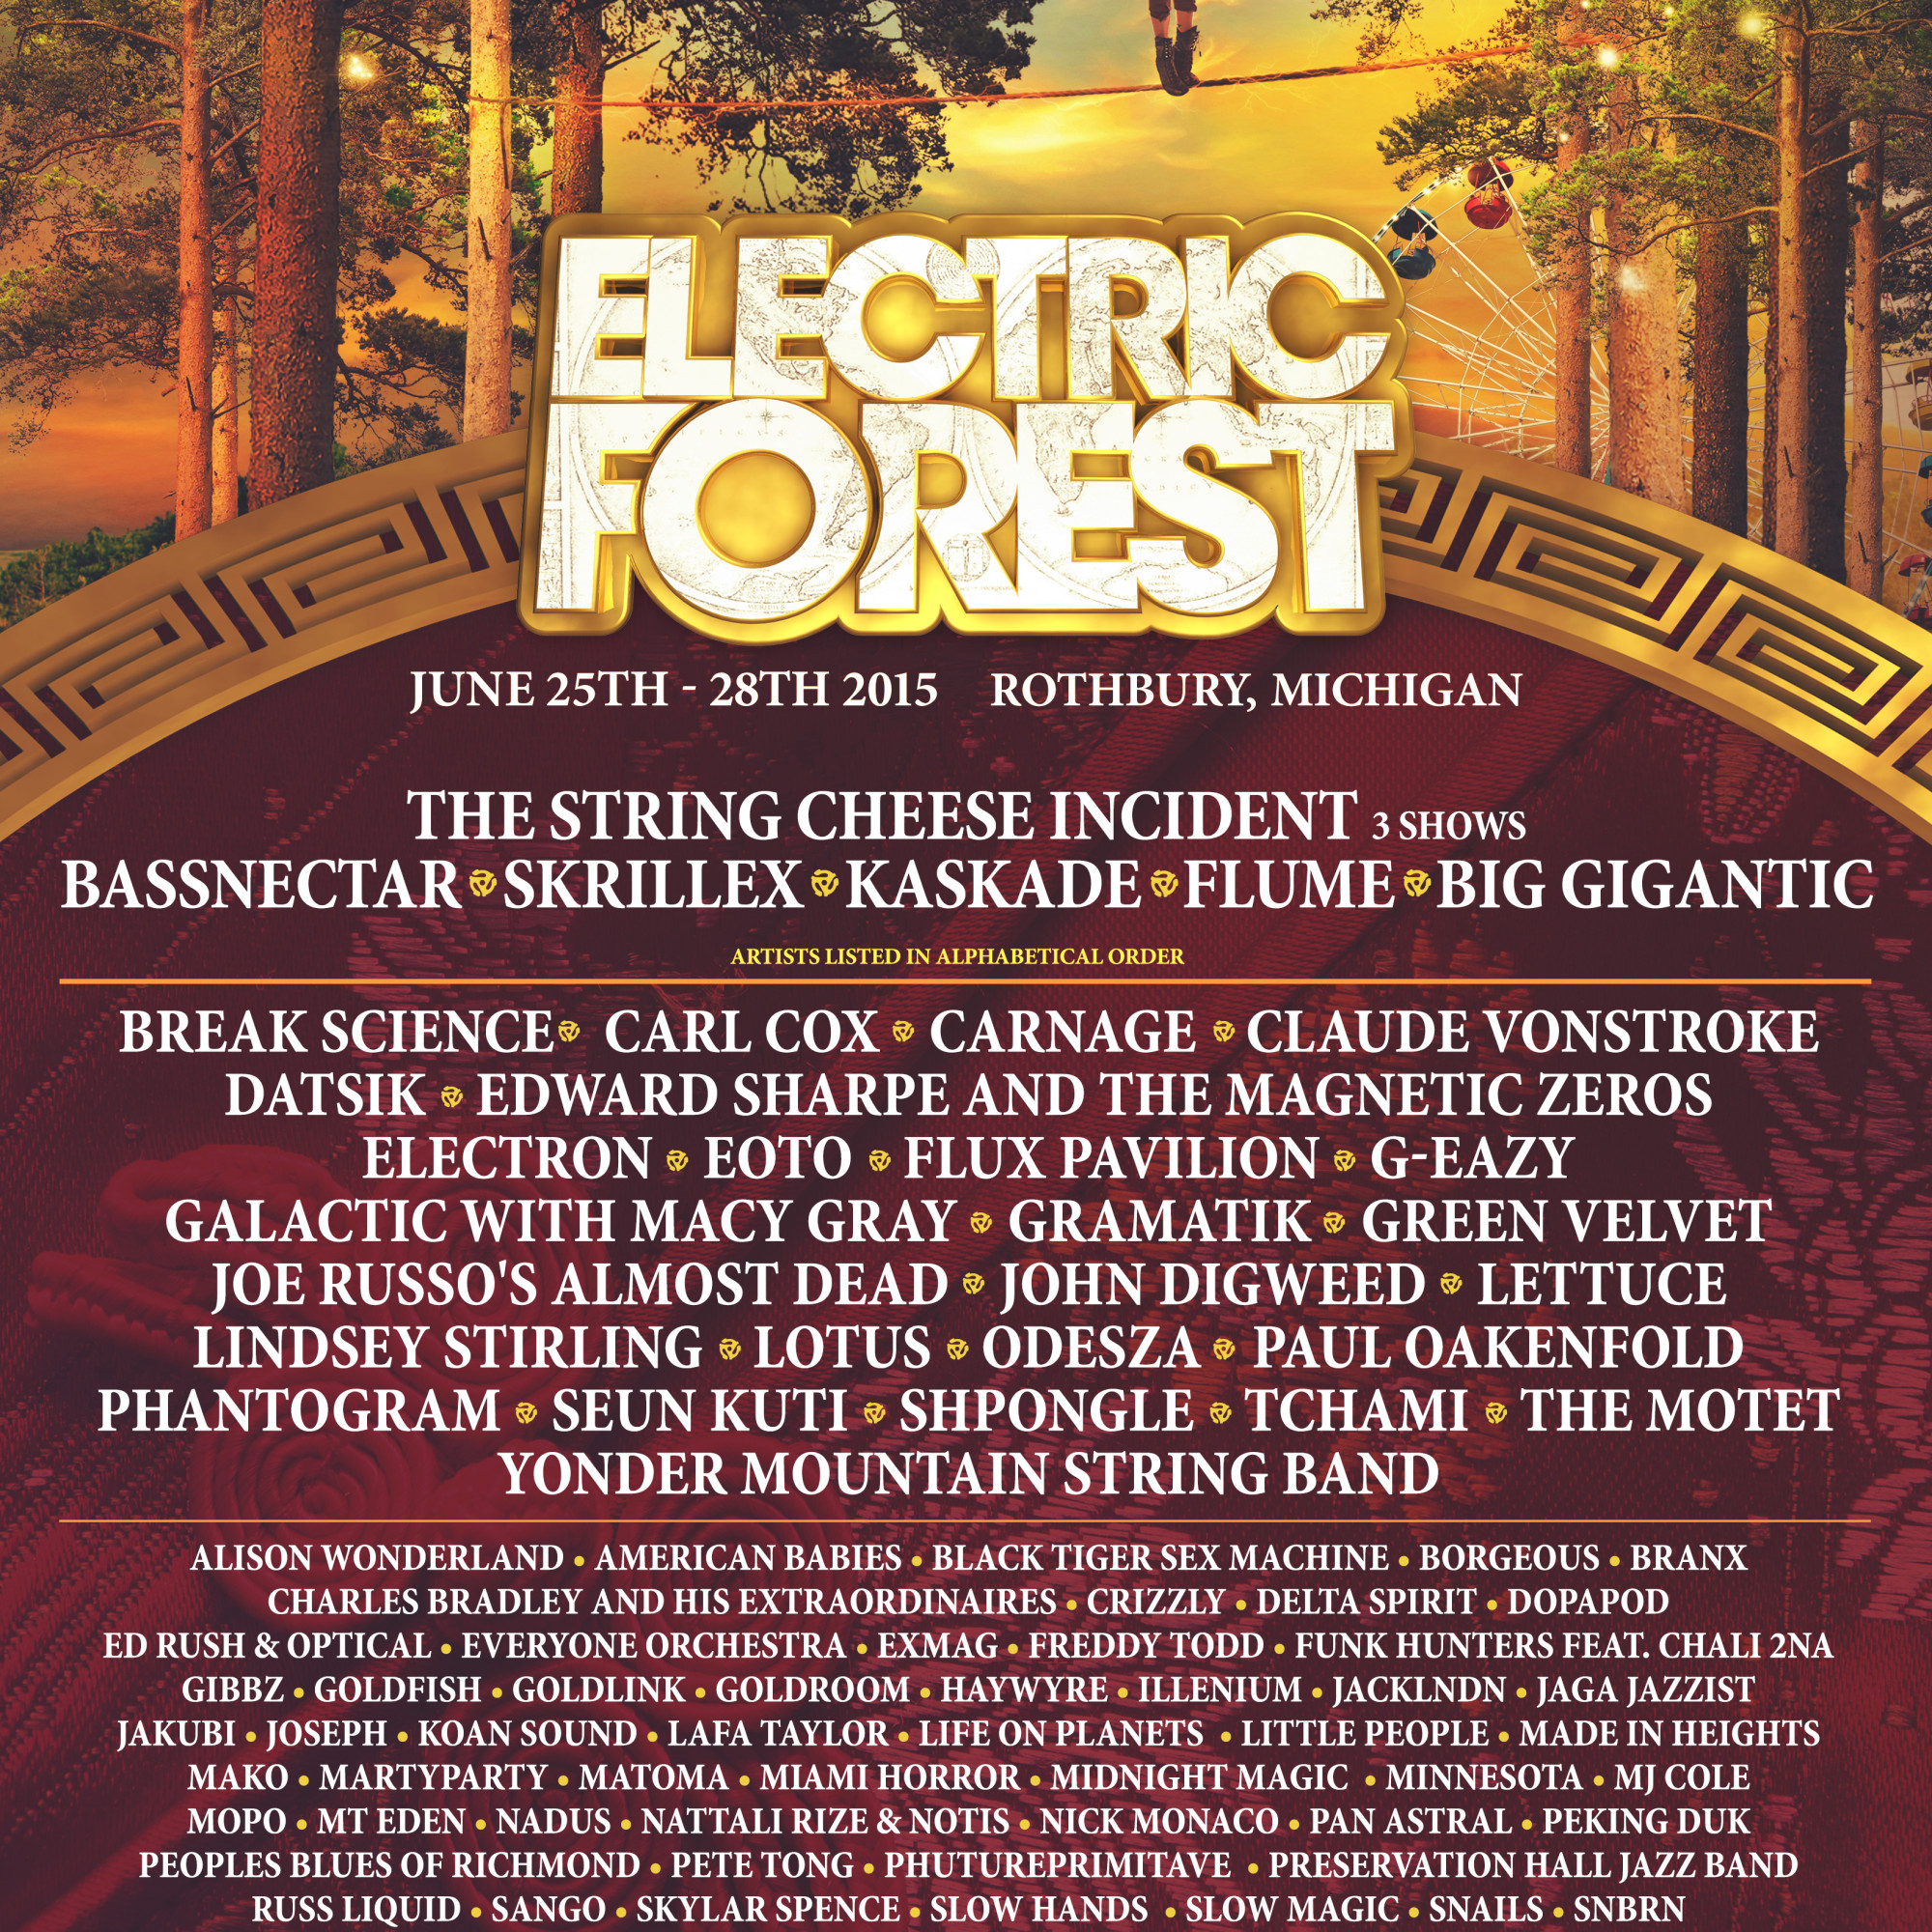 Electric Forest 2015 Lineup Rlease | WhySoChi